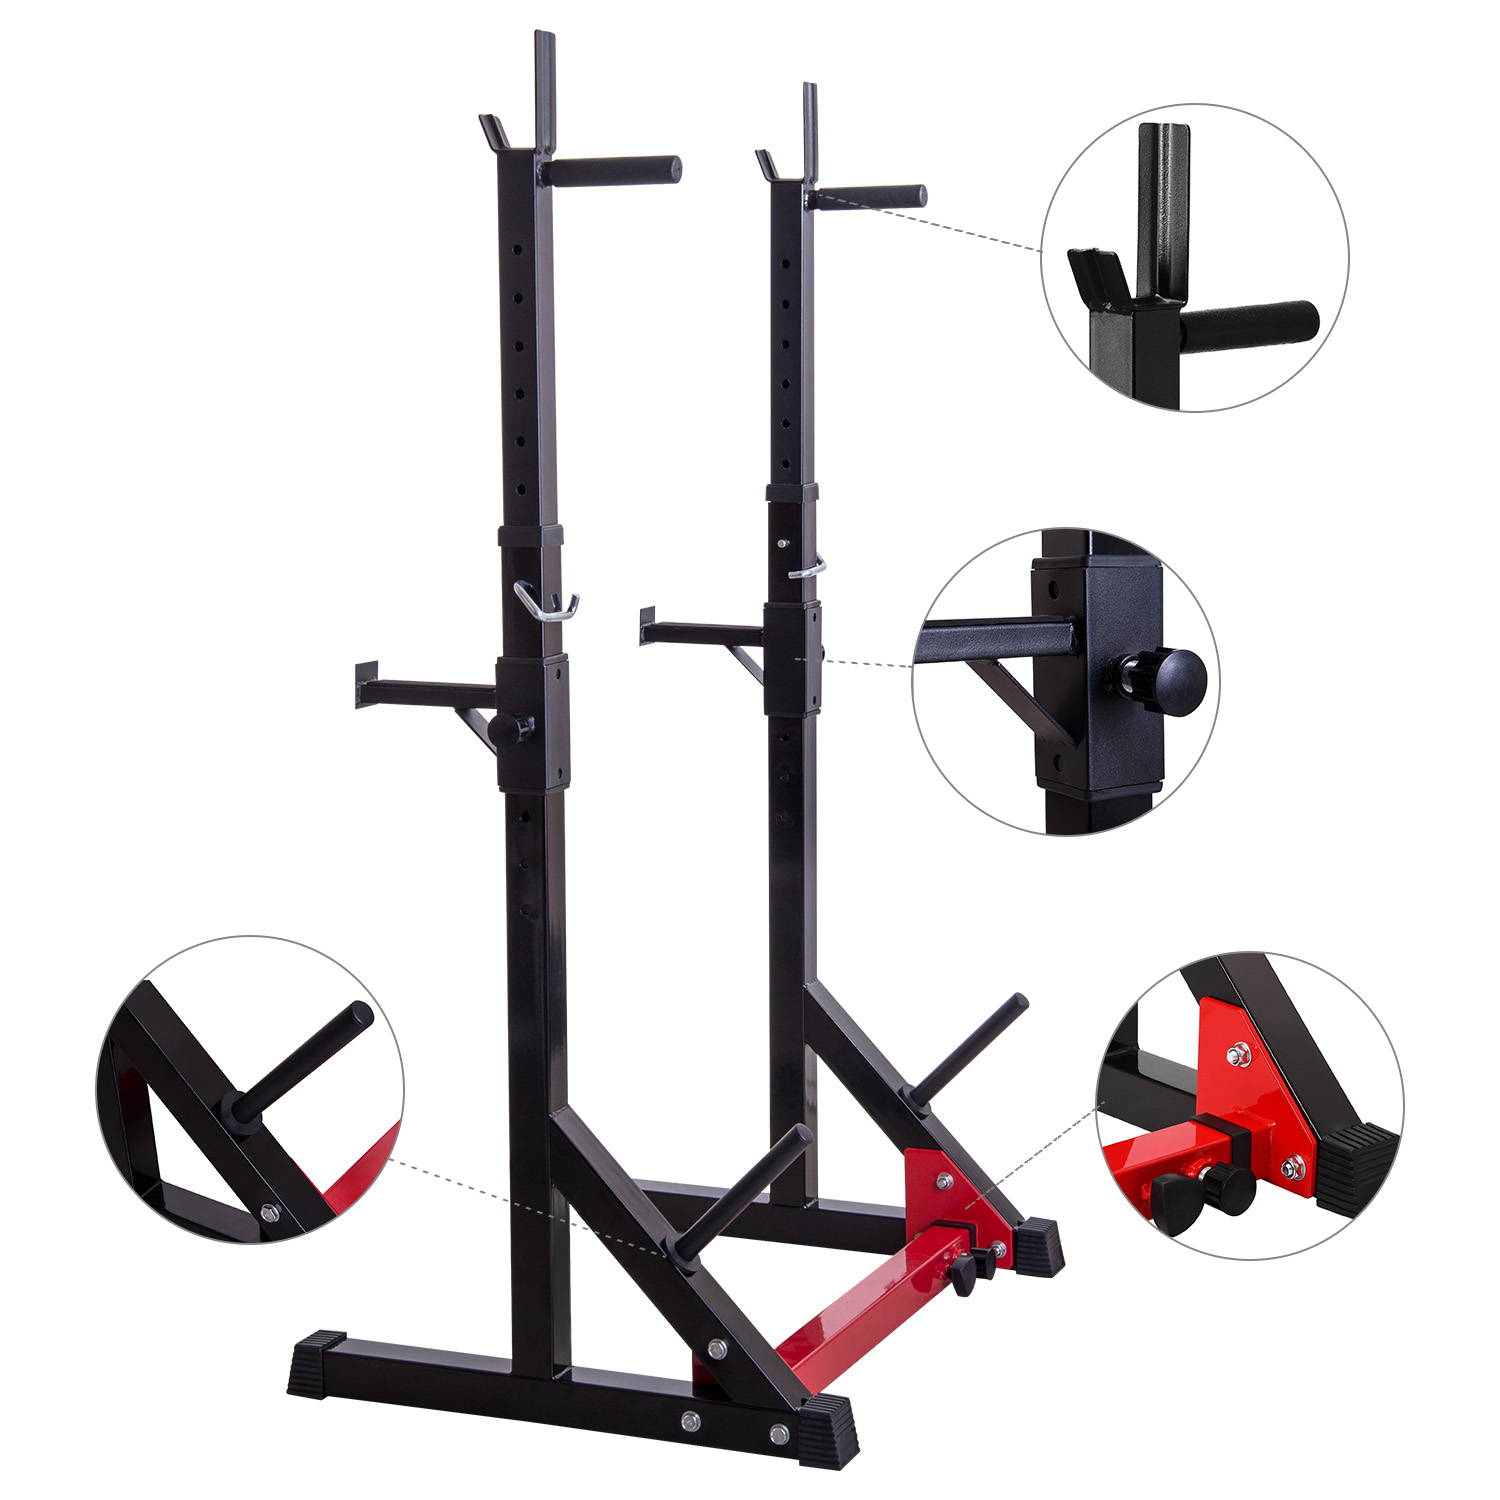 Ollieroo Multi-Functional Squat Stand can be used as a dip stand and for bench press so you can get a full-body workout